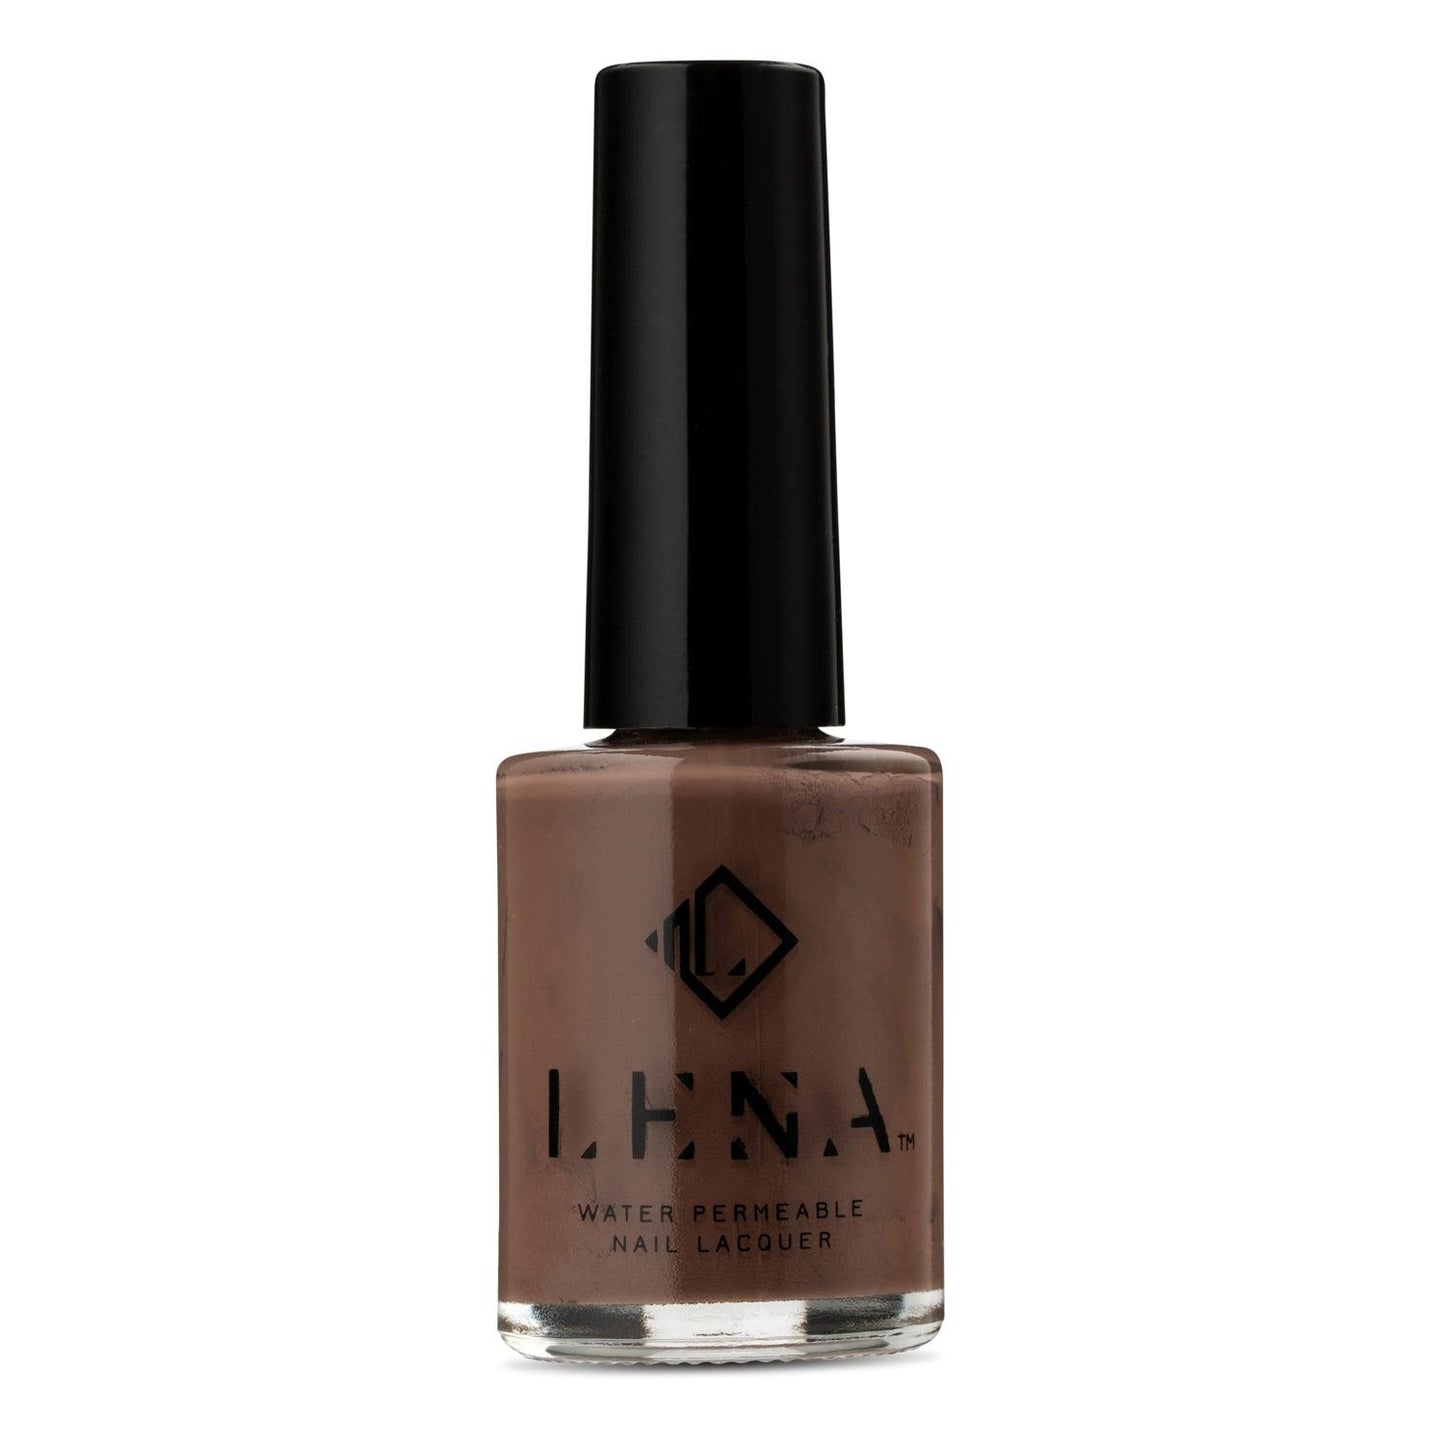 Limited Edition - Upmost Modesty - LEW42 - LENA NAIL POLISH DIRECT